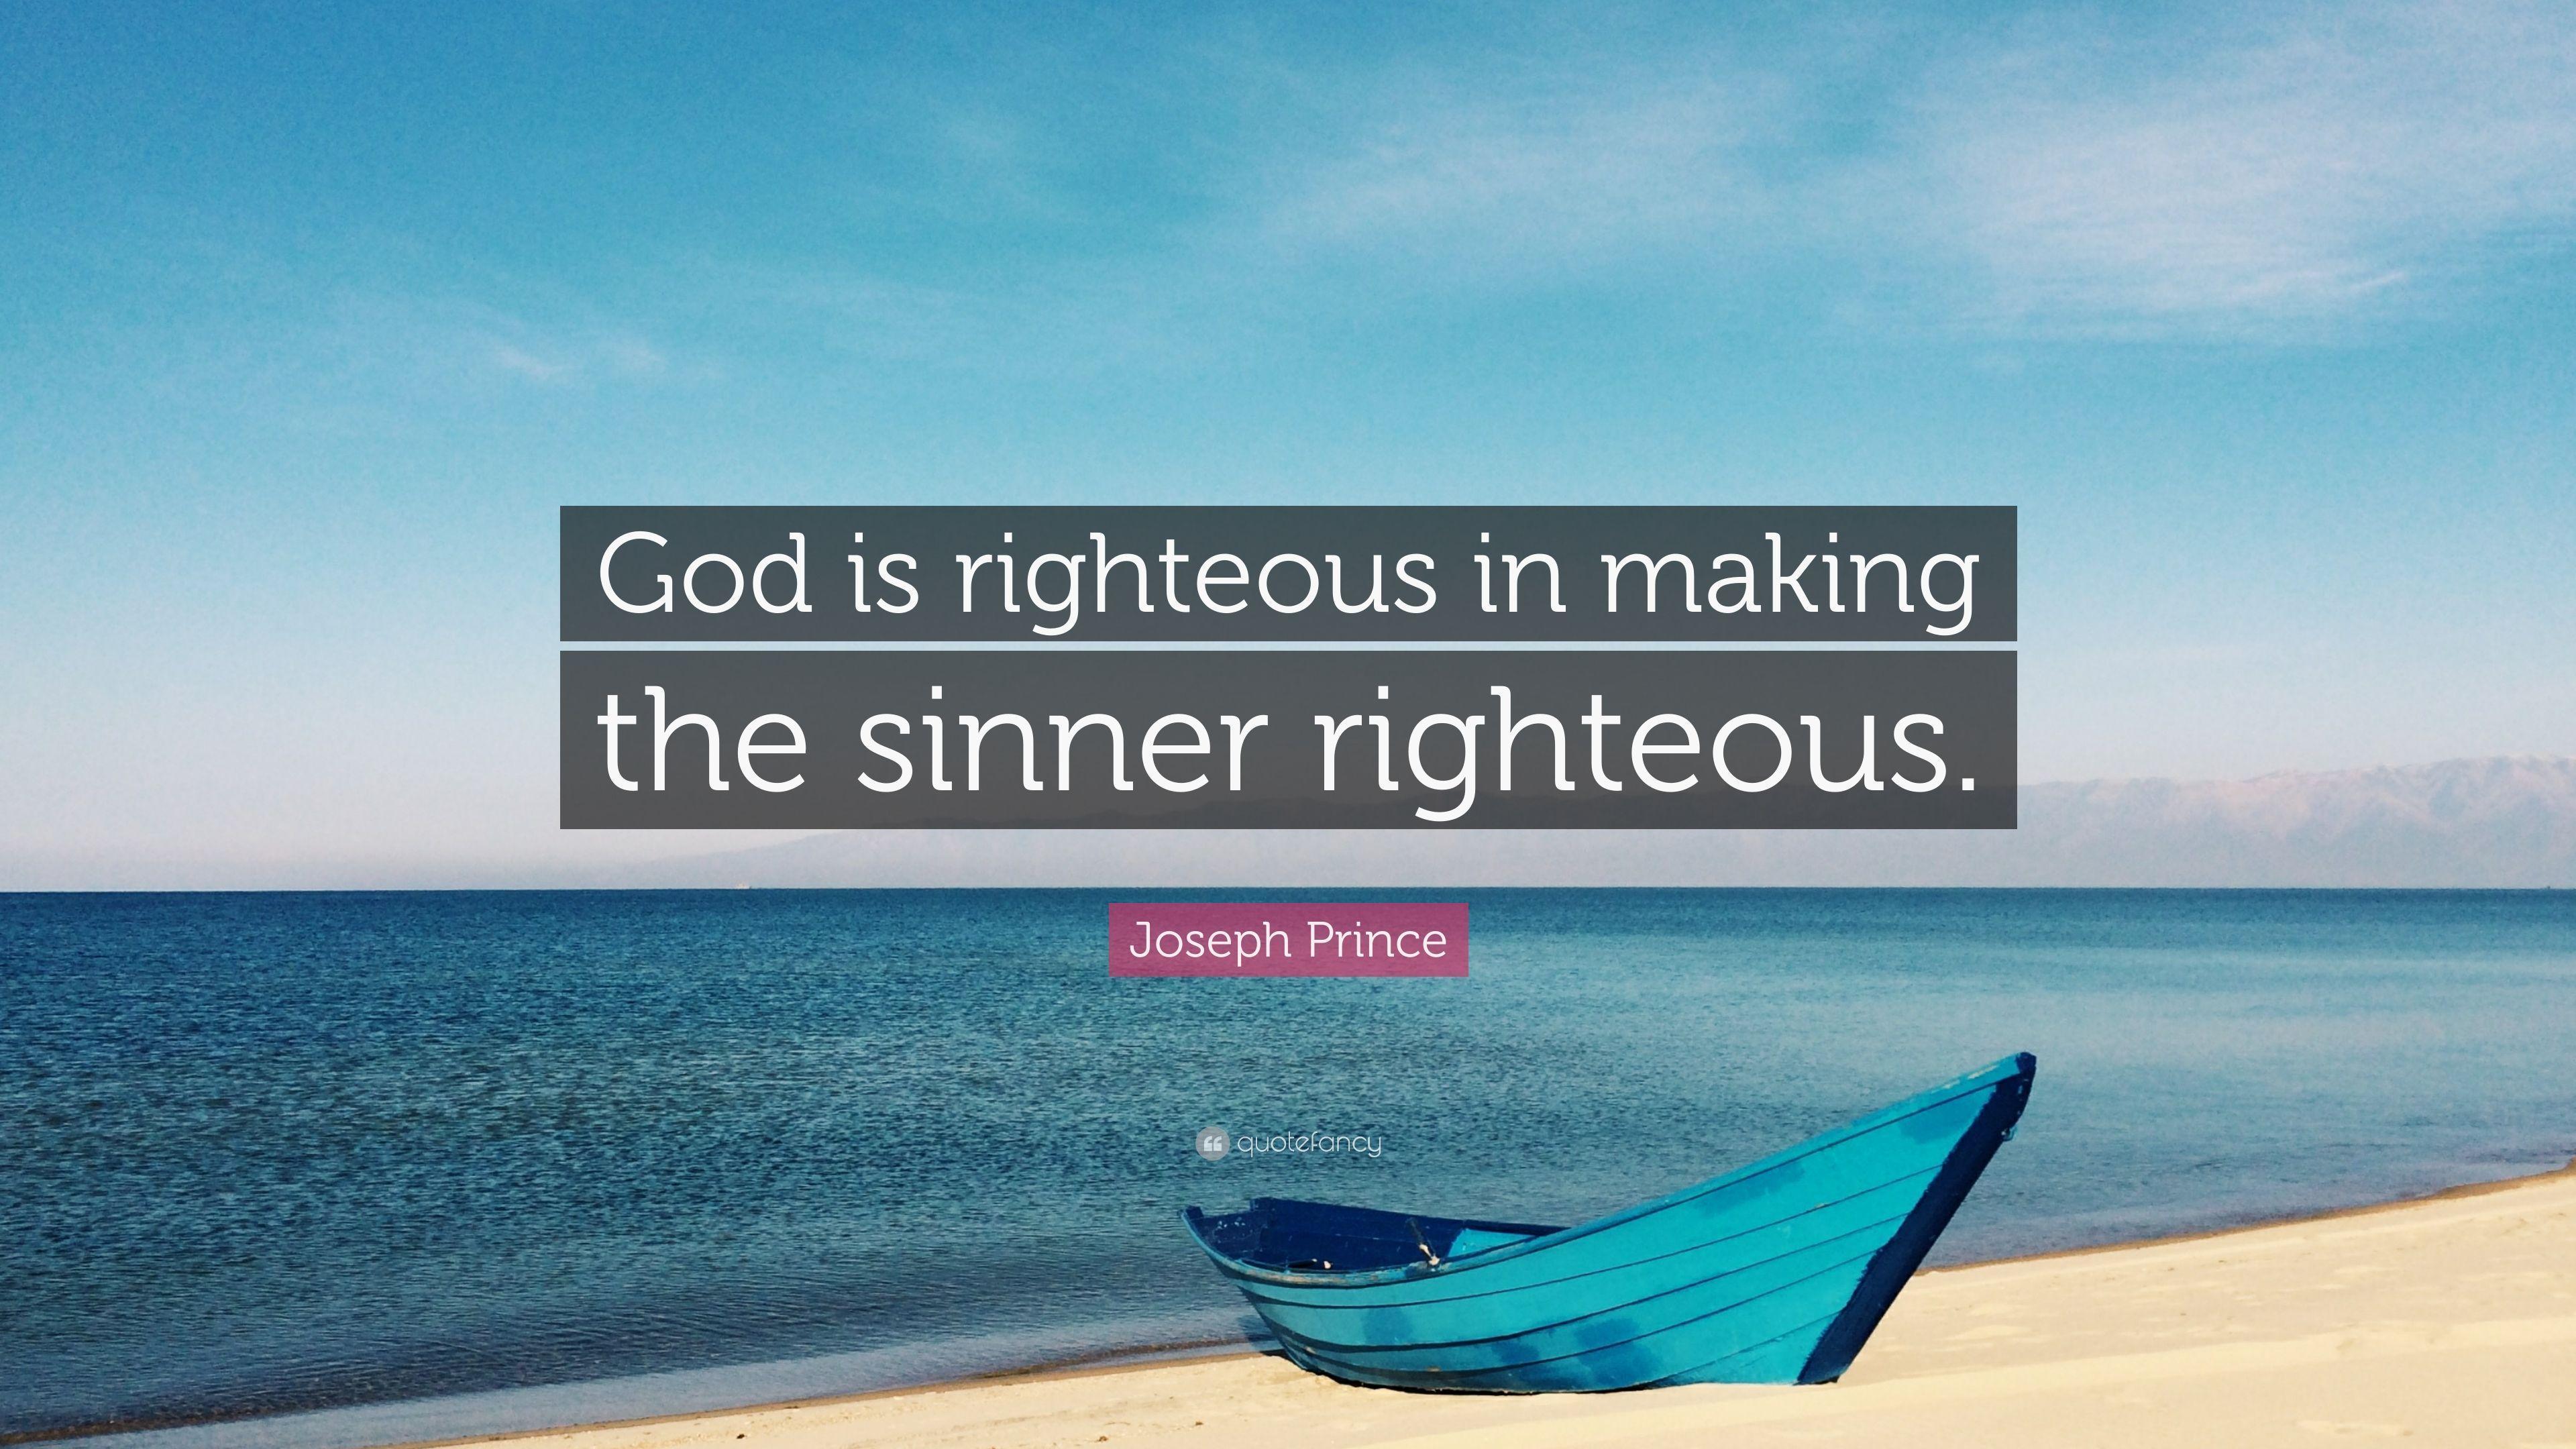 Joseph Prince Quote: “God is righteous in making the sinner